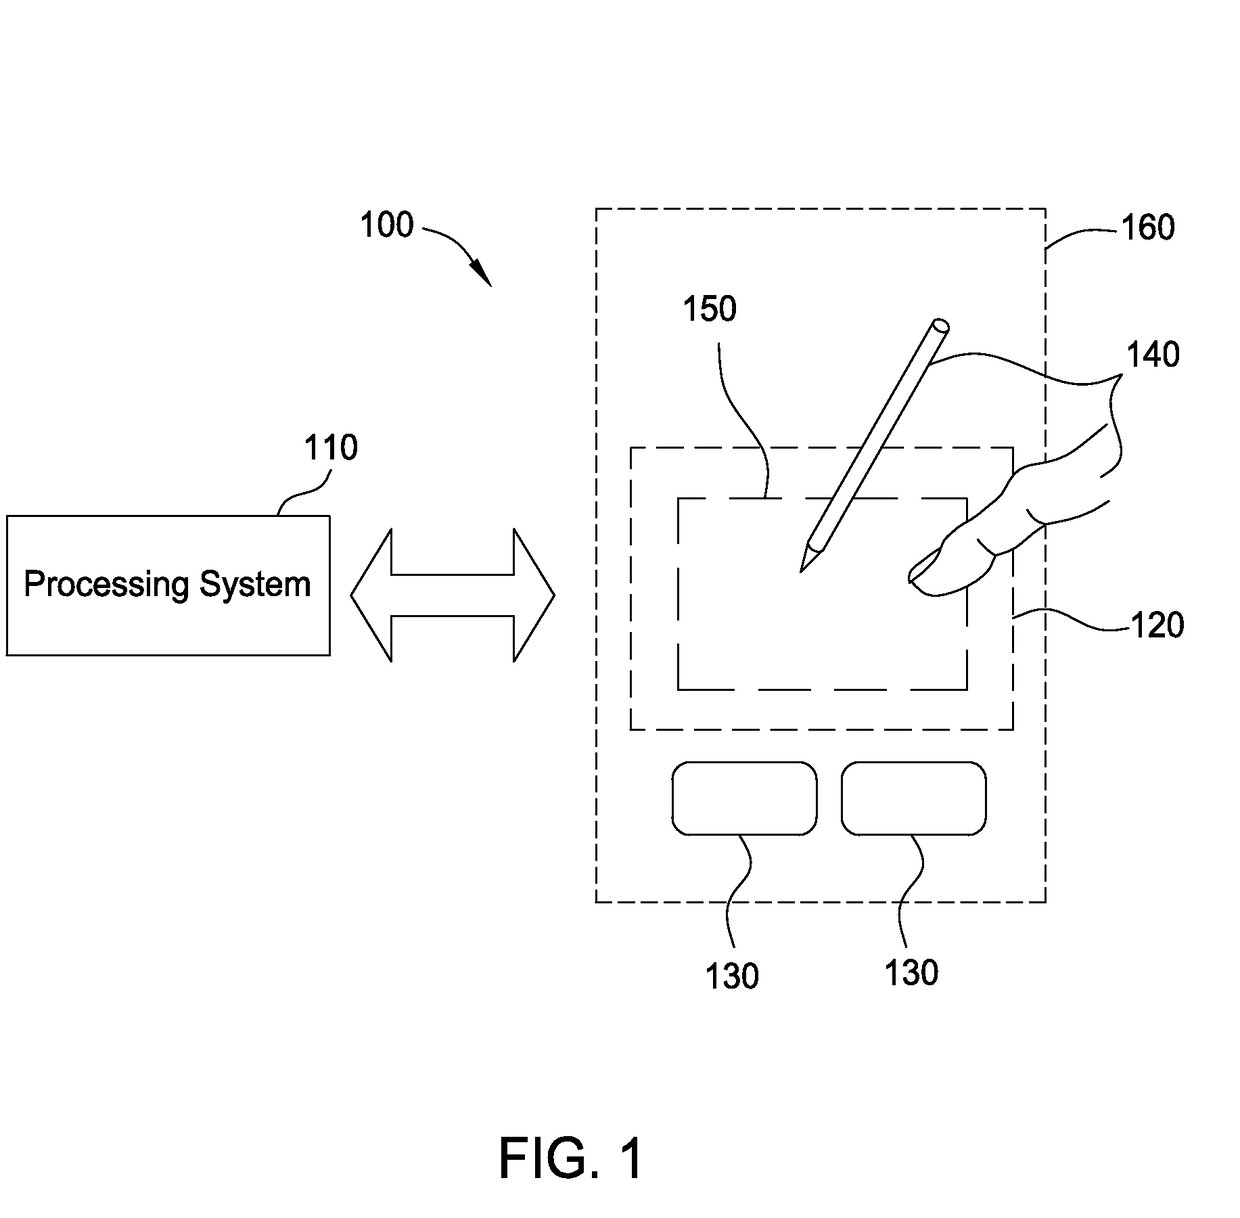 Real-time spectral noise monitoring for proximity sensing device